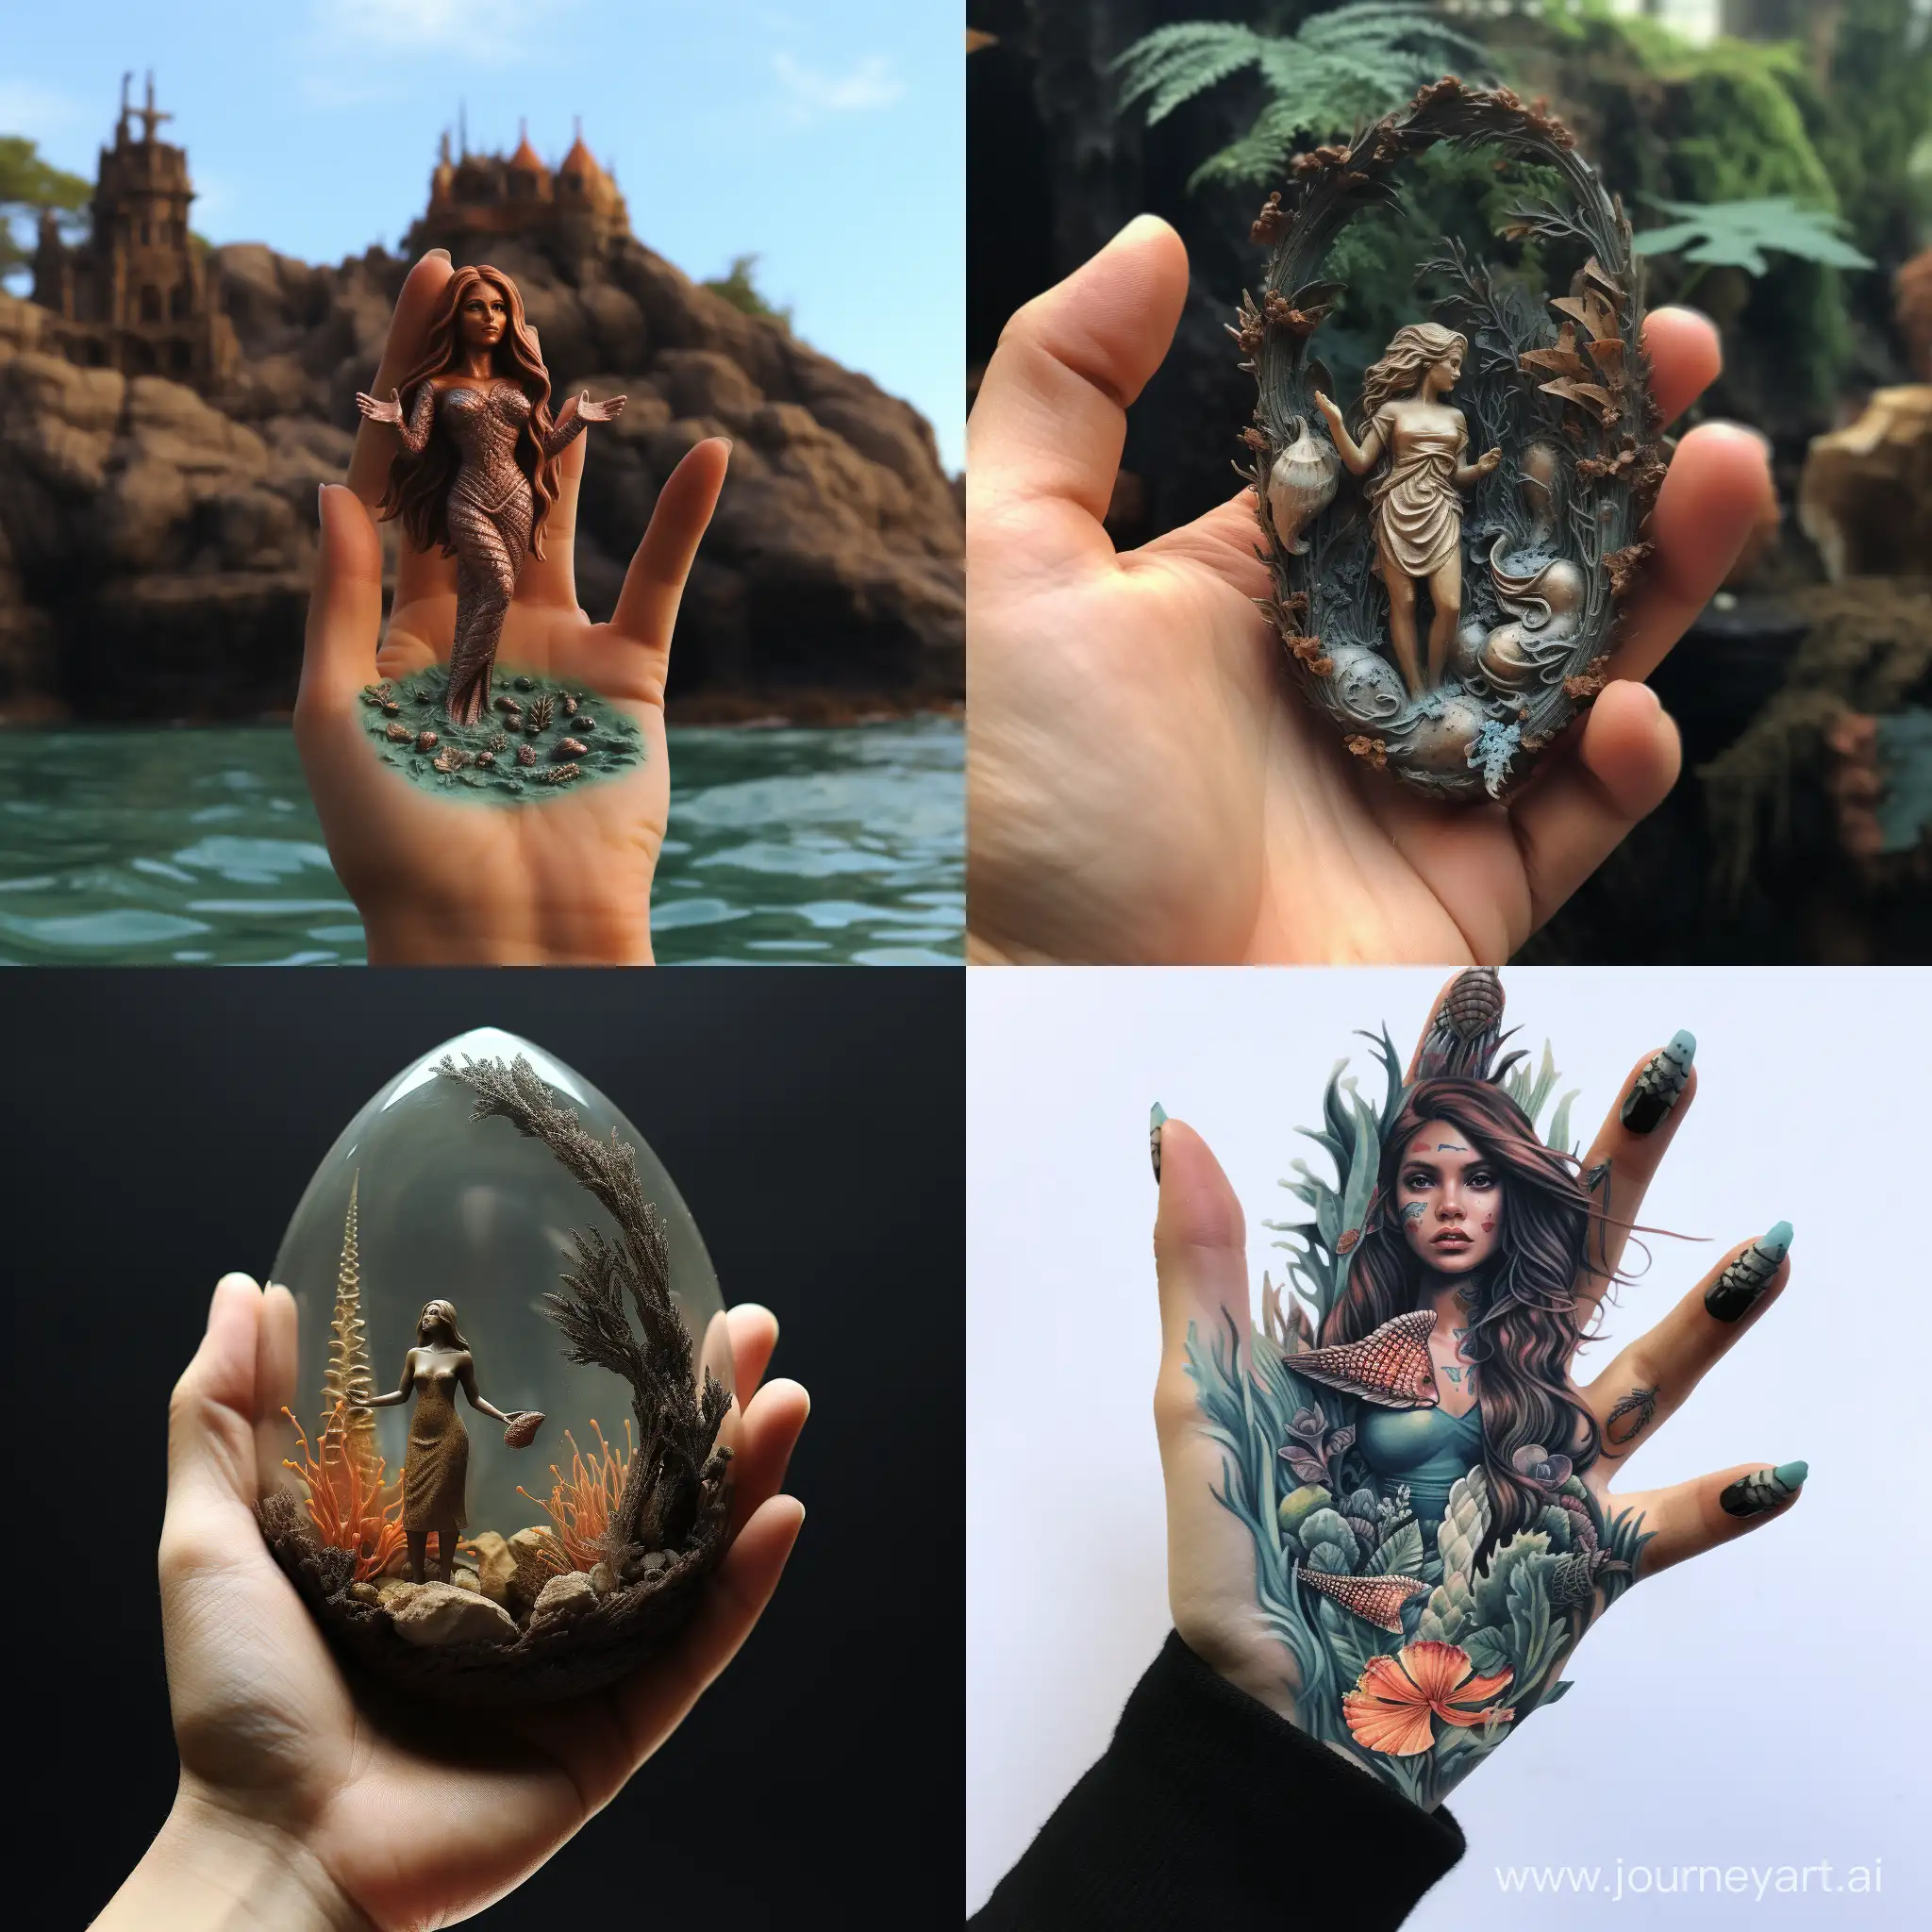 A mermaid in the palm of your hand